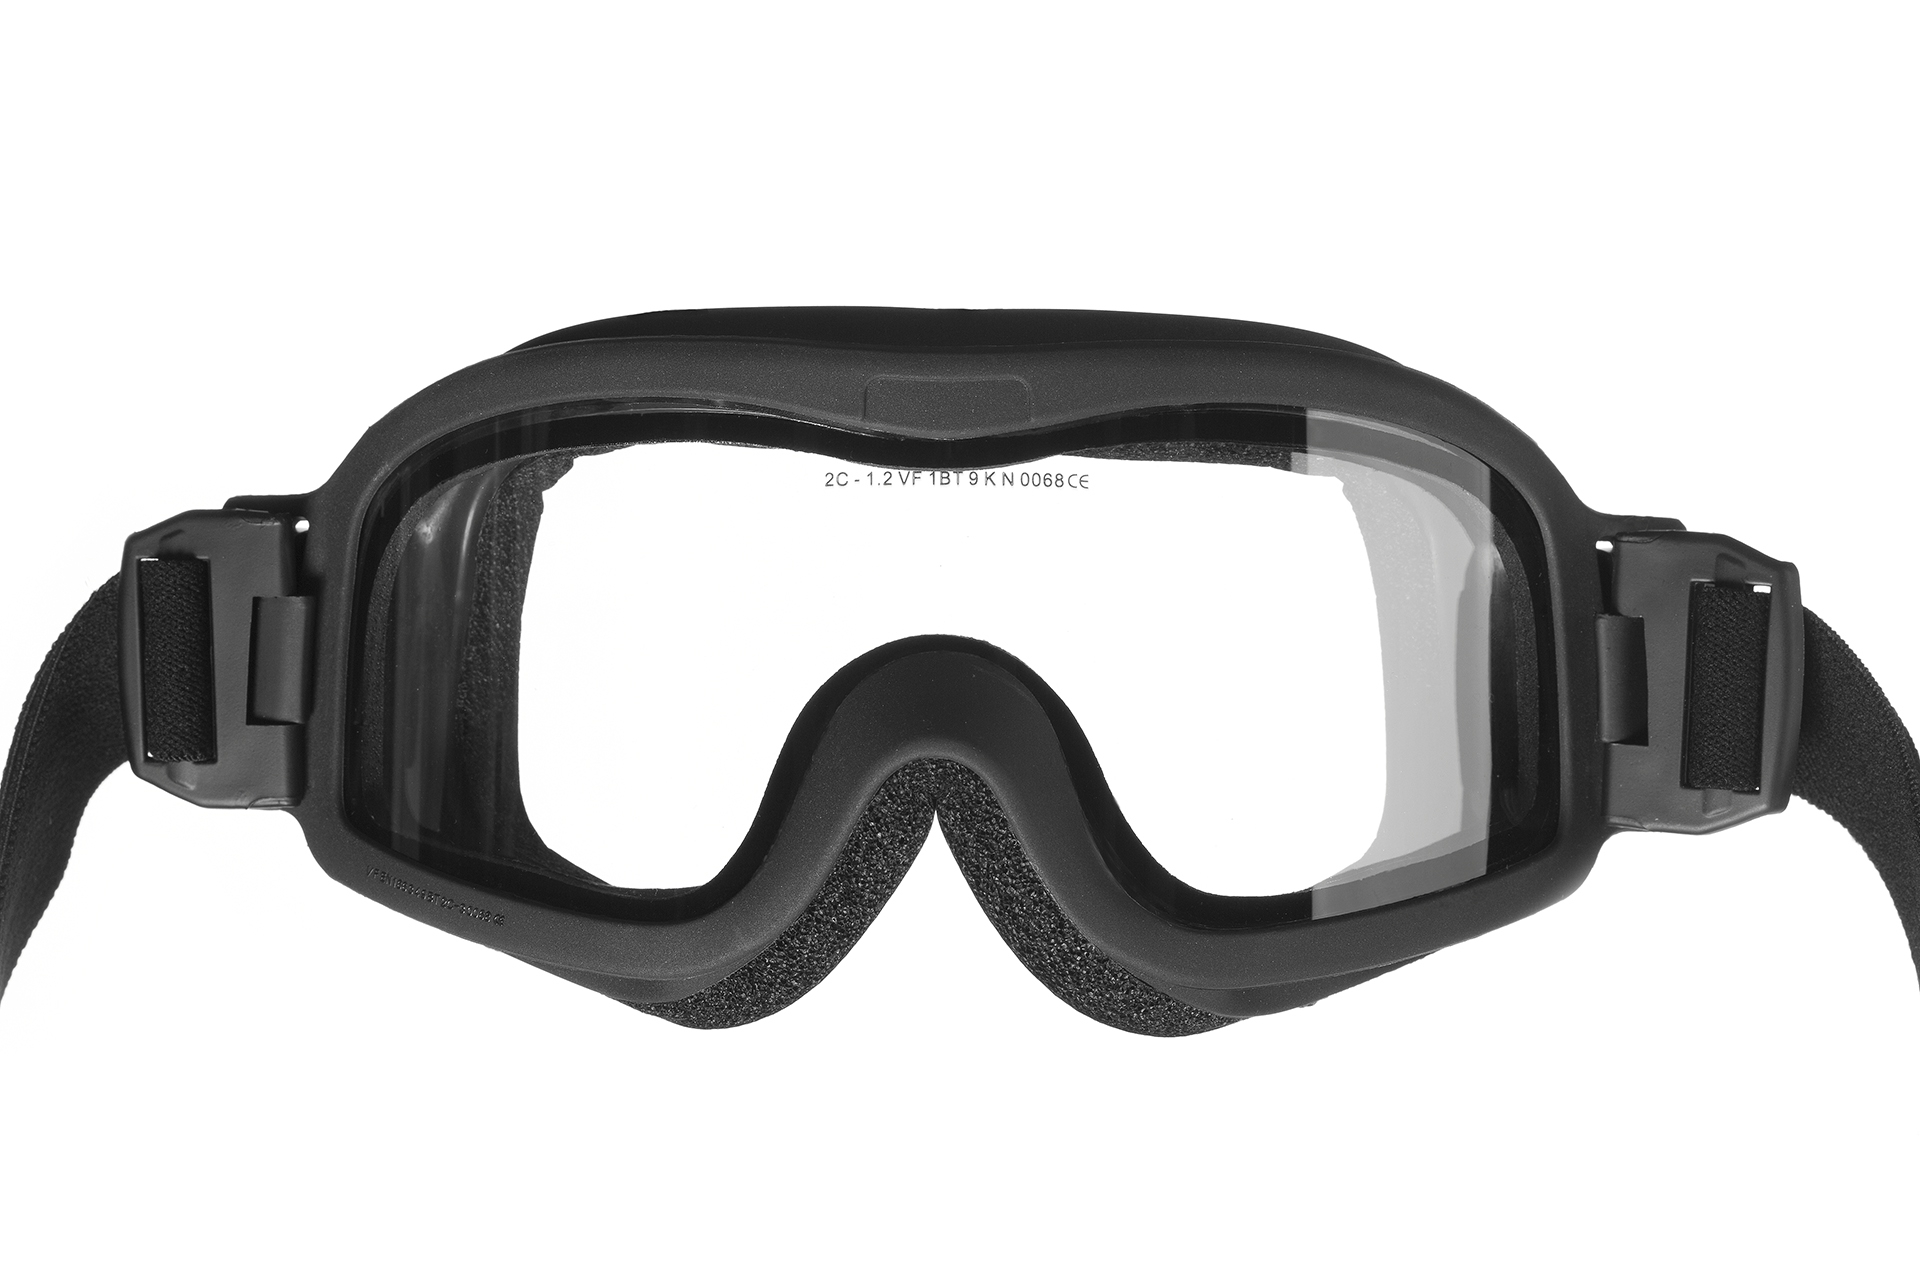 Firefighter Goggles vft1 with ventilation 3